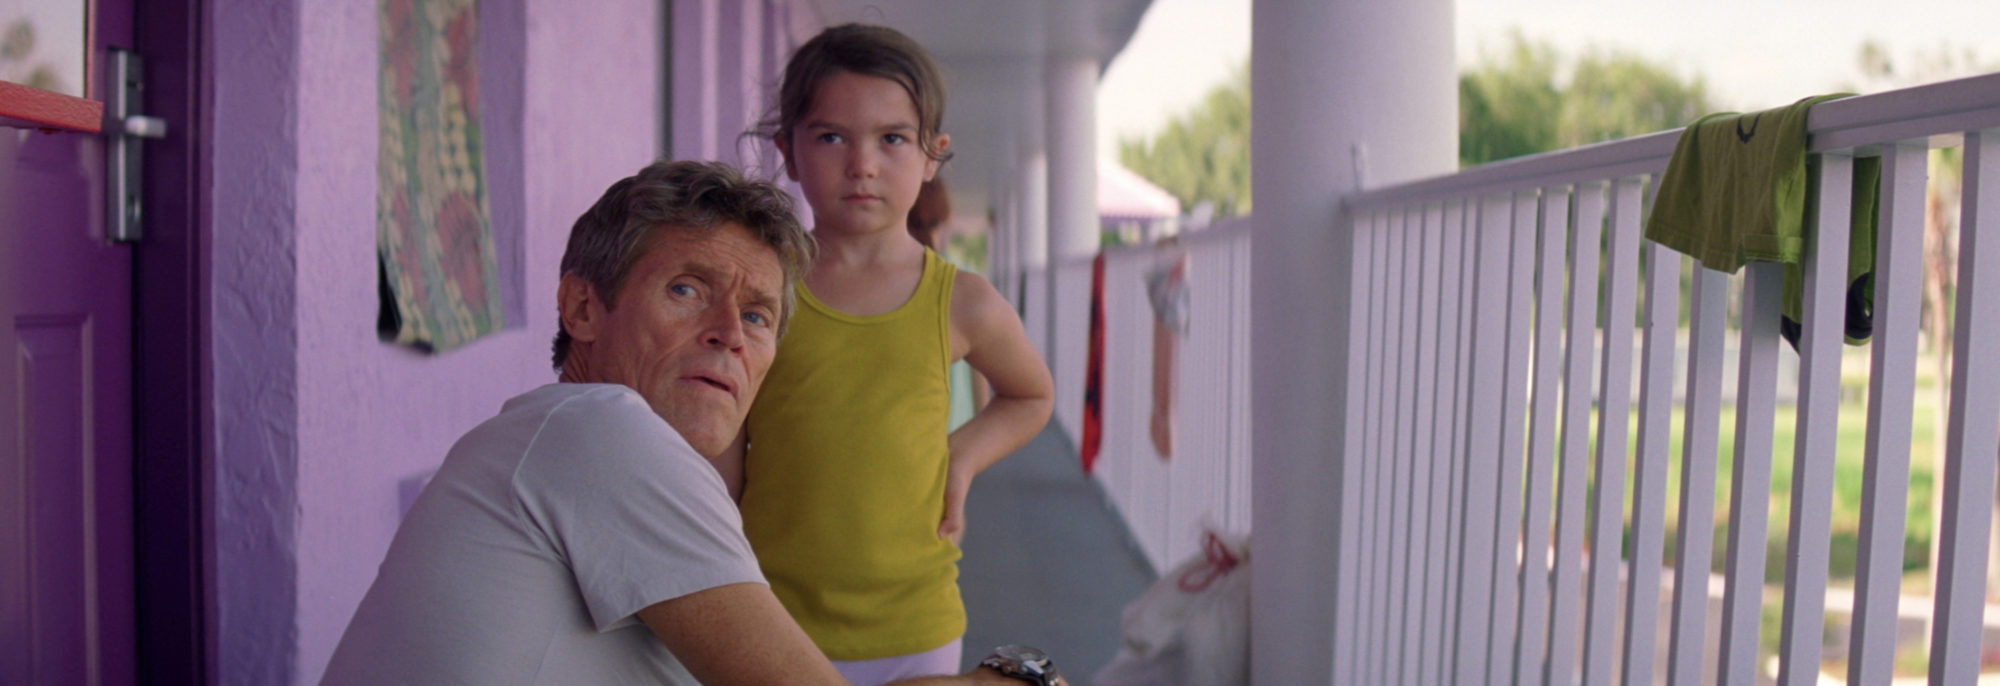 Willem Dafoe and Brooklynn Prince in Sean Baker's The Florida Project